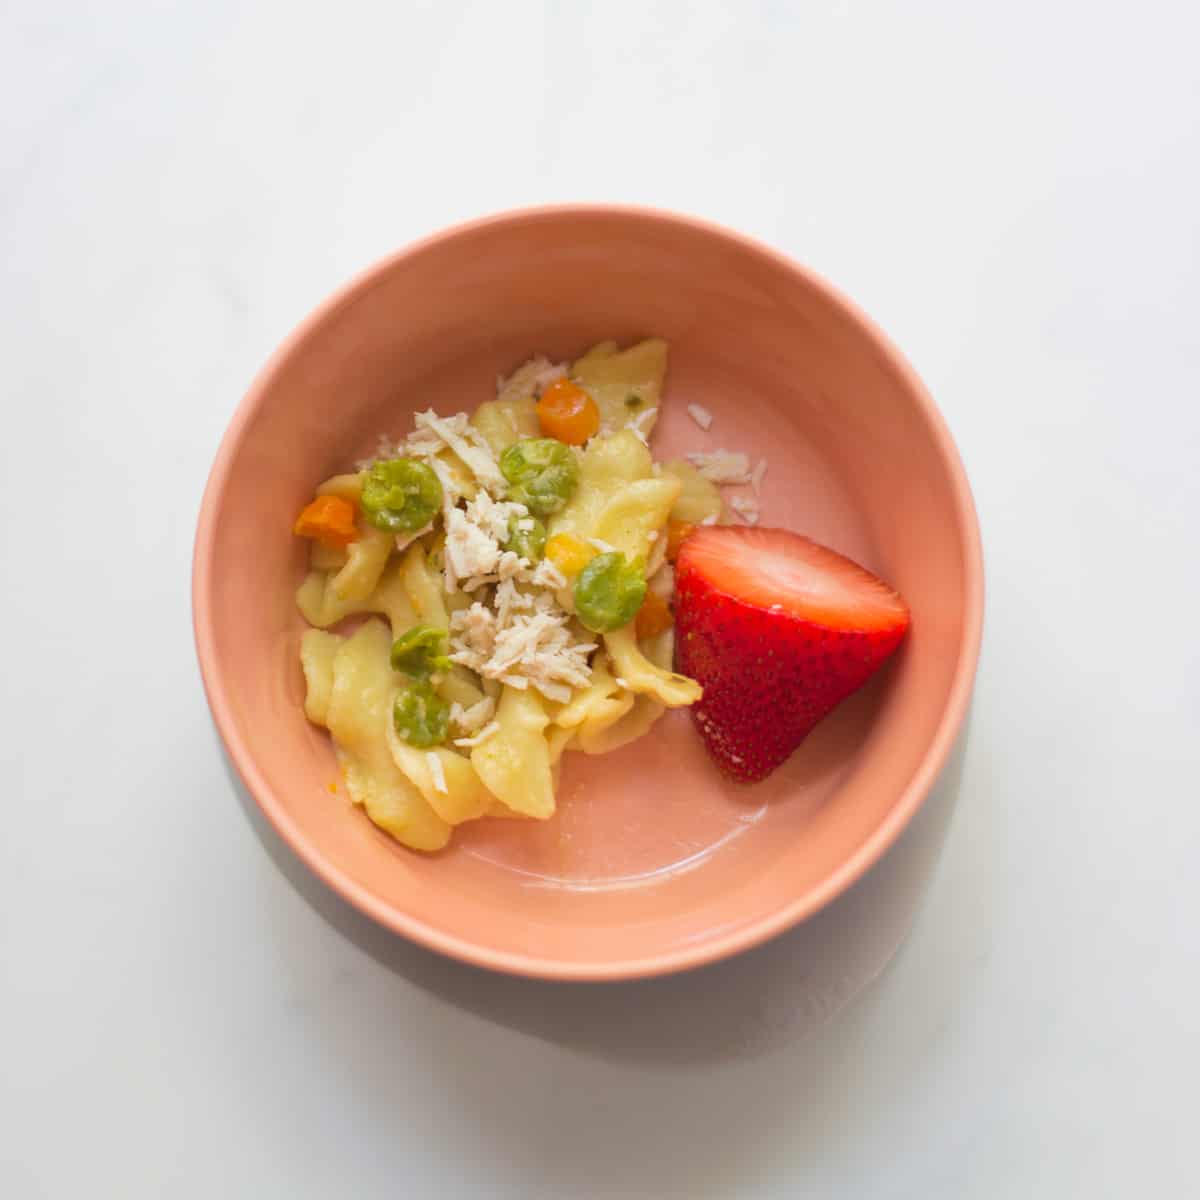 A small portion of IP chicken and noodles with a large strawberry in a baby bowl.